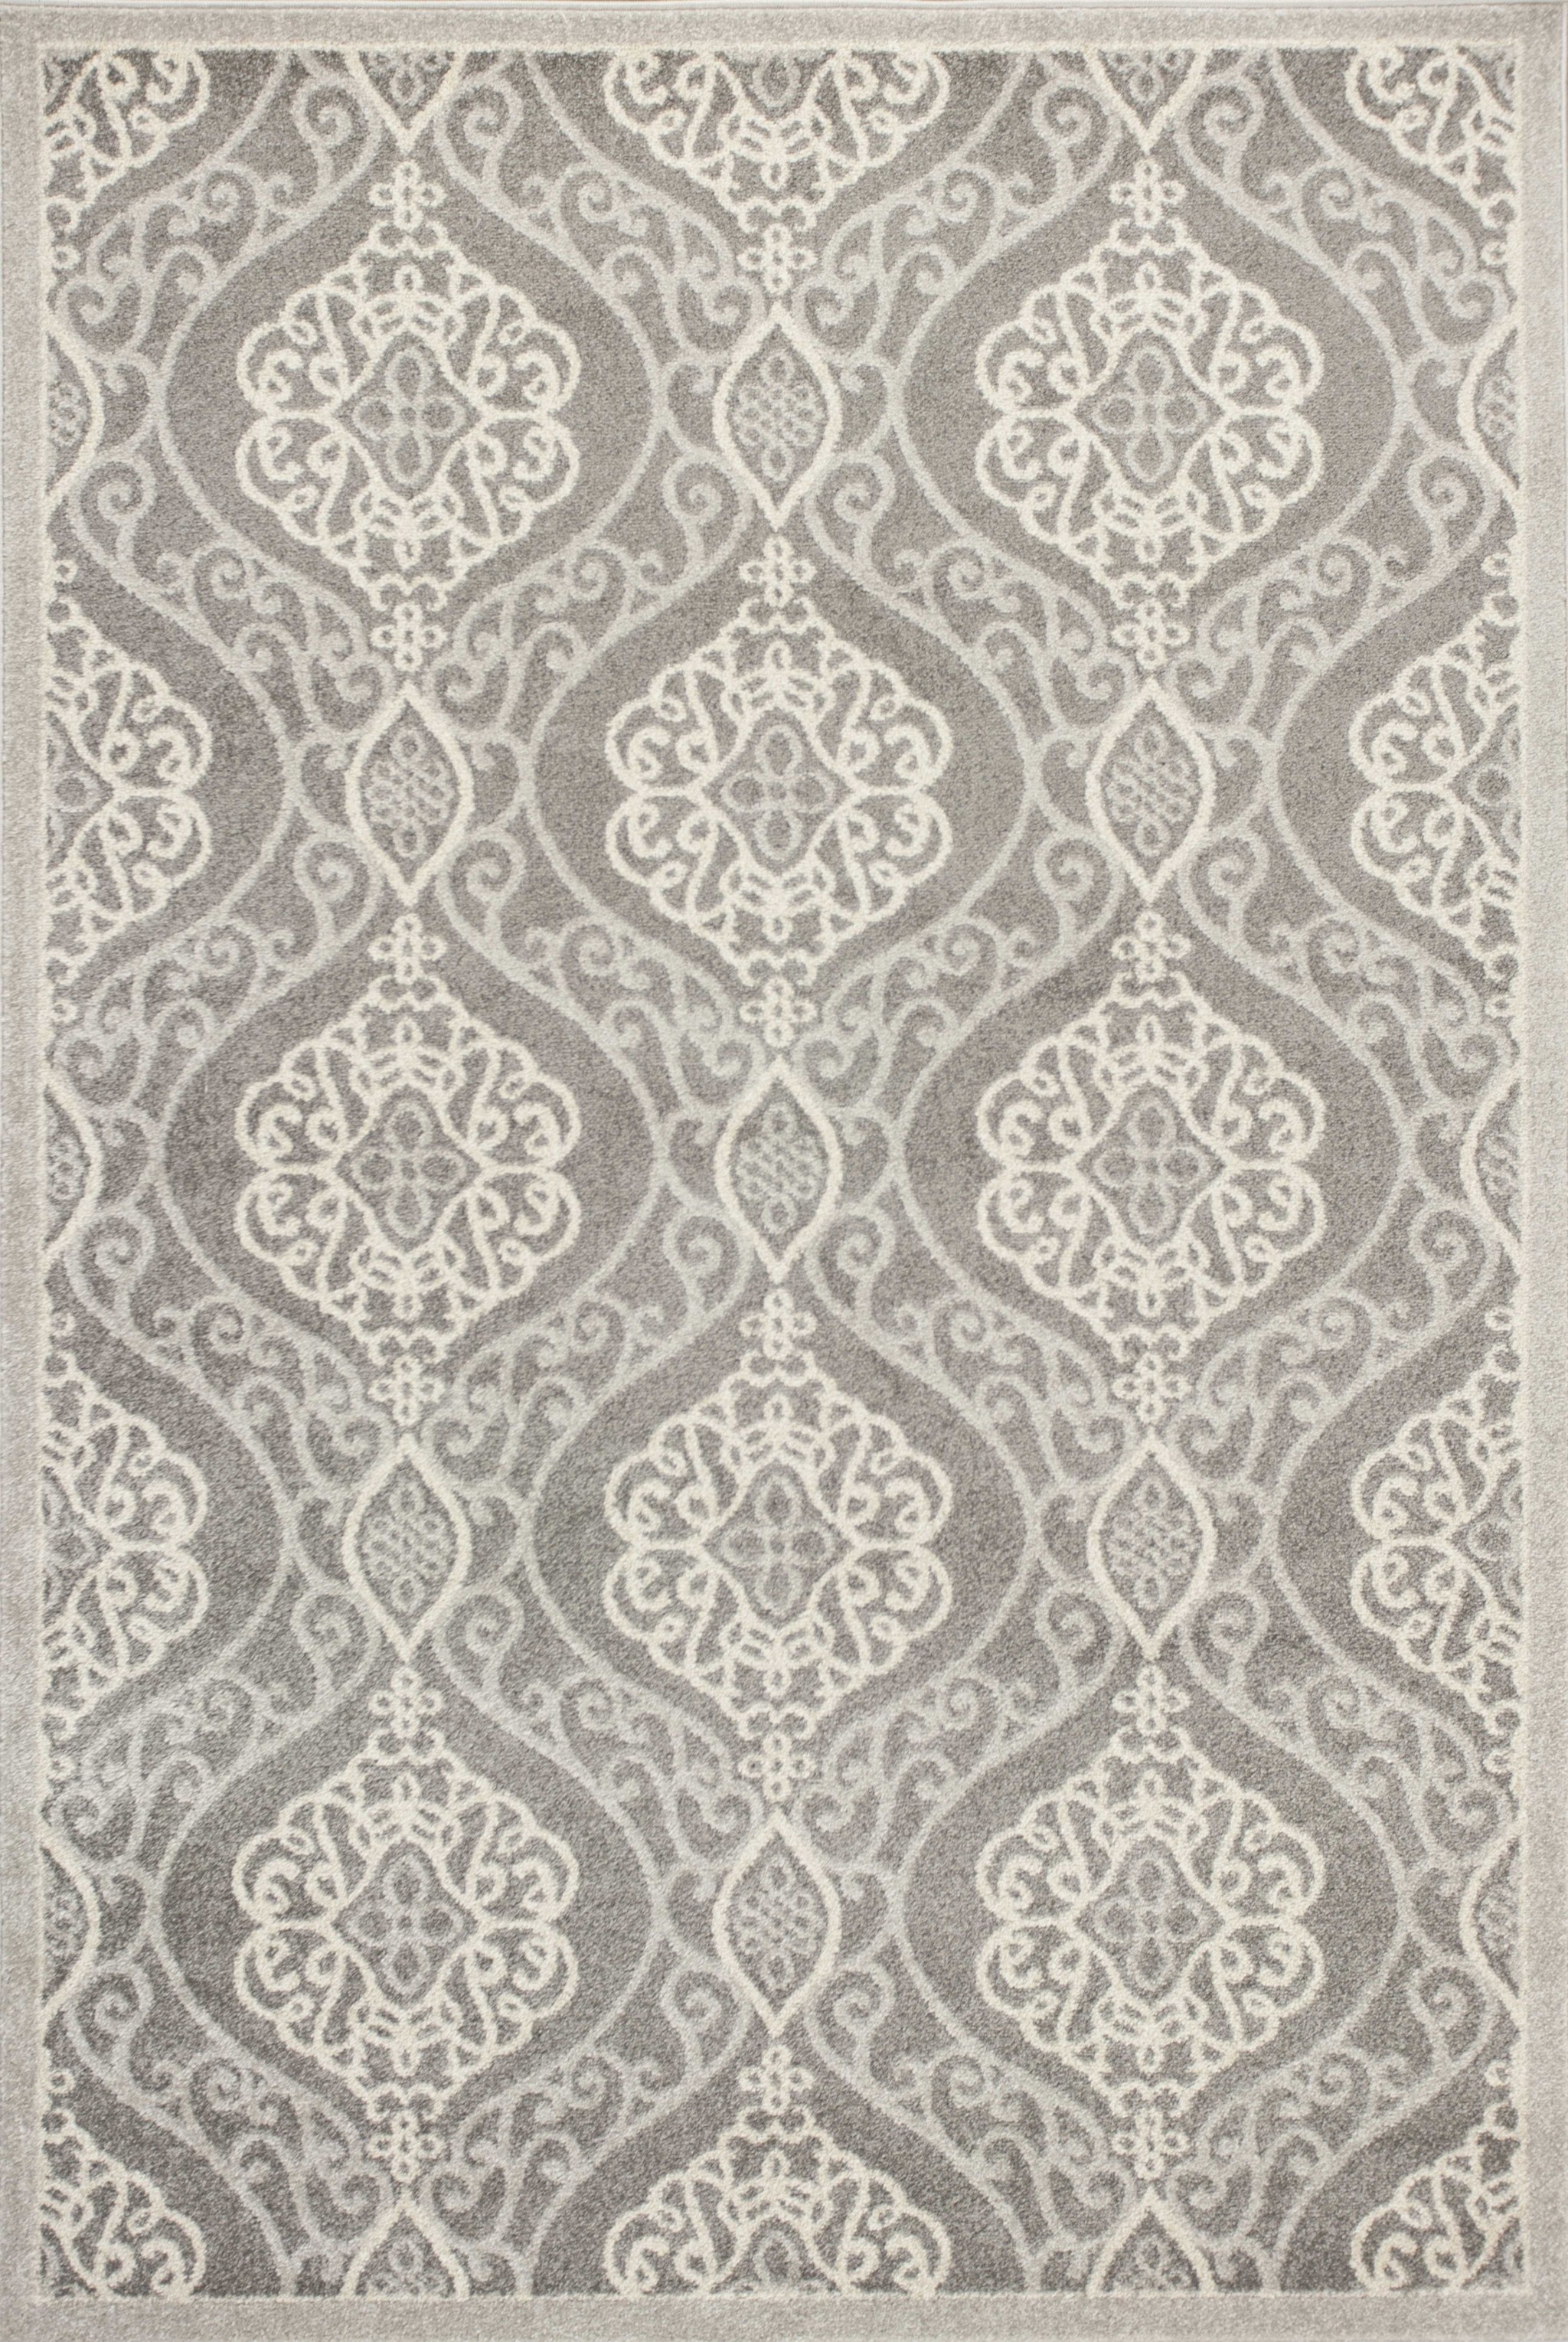 3'X5' Silver Grey Machine Woven Uv Treated Floral Ogee Indoor Outdoor Area Rug-353457-1